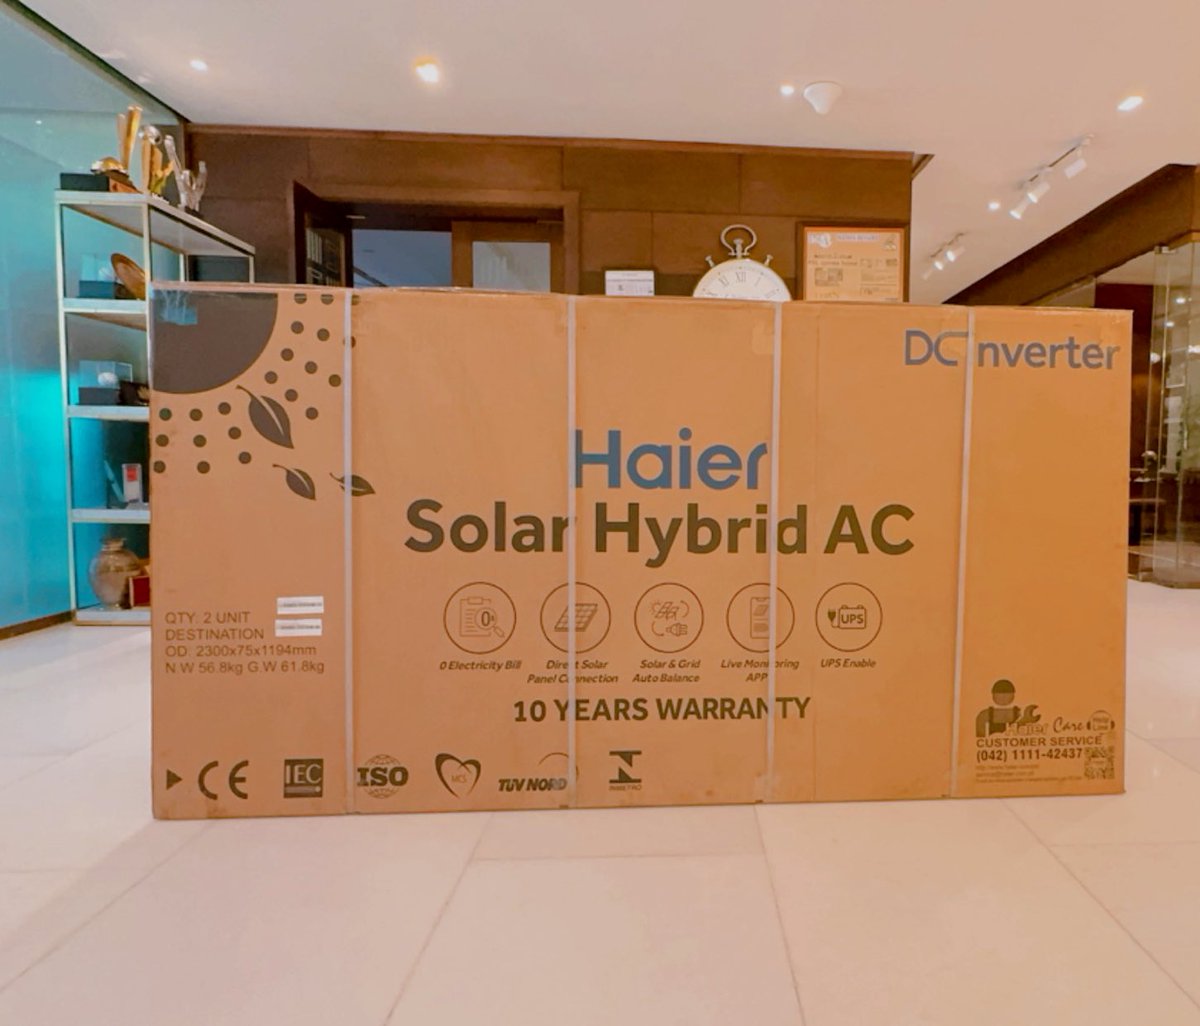 Haier Solar Hybrid Air Conditioner. 1.5 ton Heat & Cool. ✔️Zero electricity bills during the day ✔️Up to 70% energy saving ✔️5-Star efficiency ✔️ROI 2 years 1. Solar Direct Drive, which operates directly with solar panels 2. Auto Balance system for optimal performance 3.…